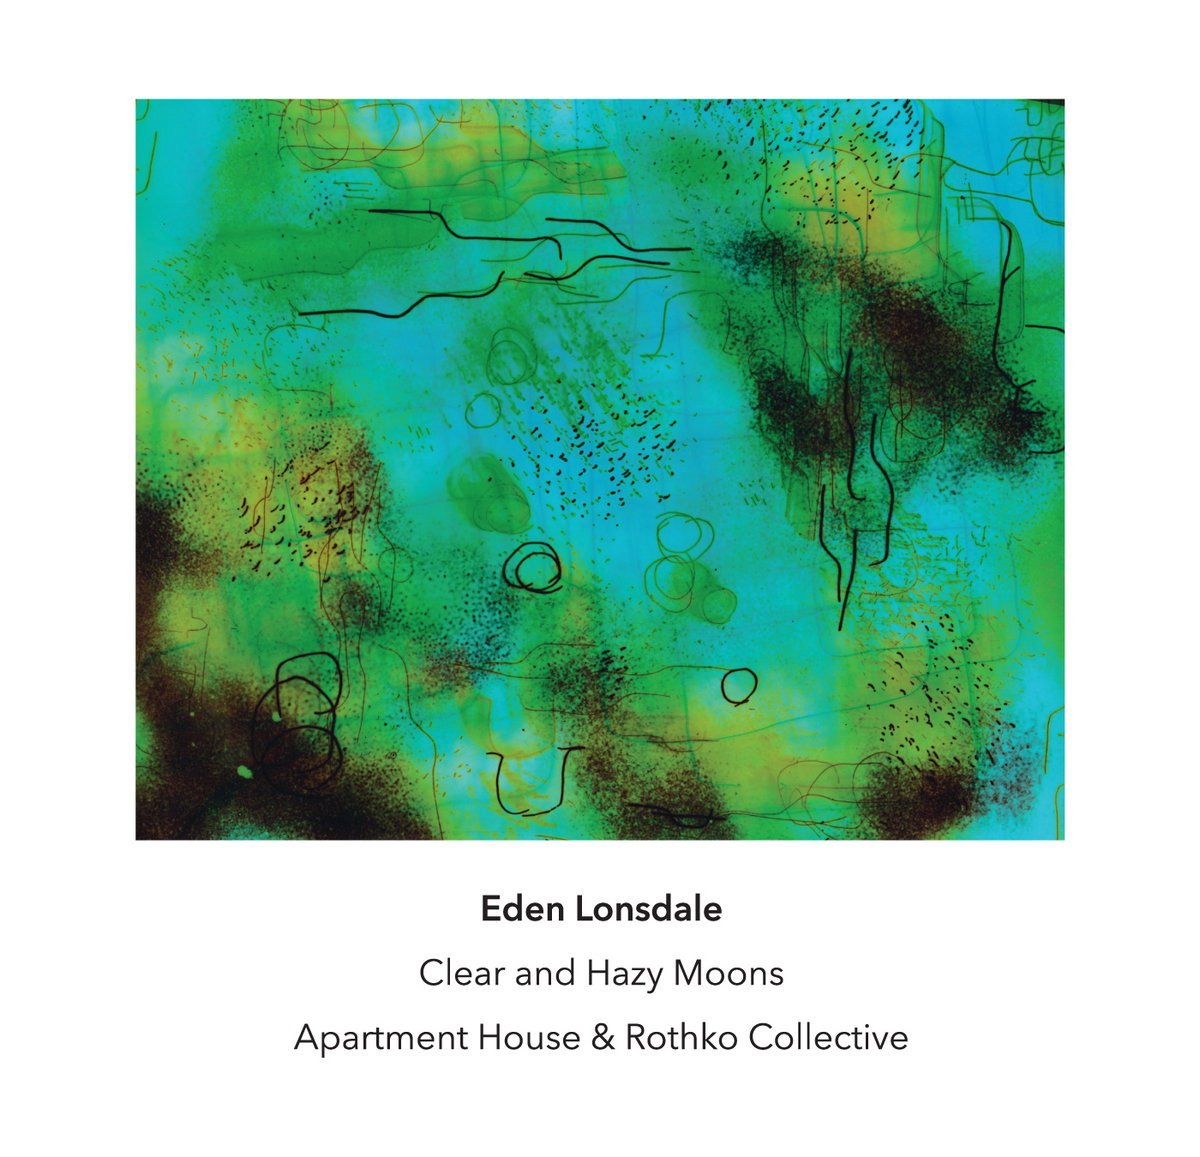 review of @LonsdaleEden Clear and Hazy Moons 'an impressive debut release- with Lonsdale showing he can create work that hovers between uneasy & harmony, and disquiet & lushness' @house_apartment #anothertimbre bit.ly/3YG9Ybe